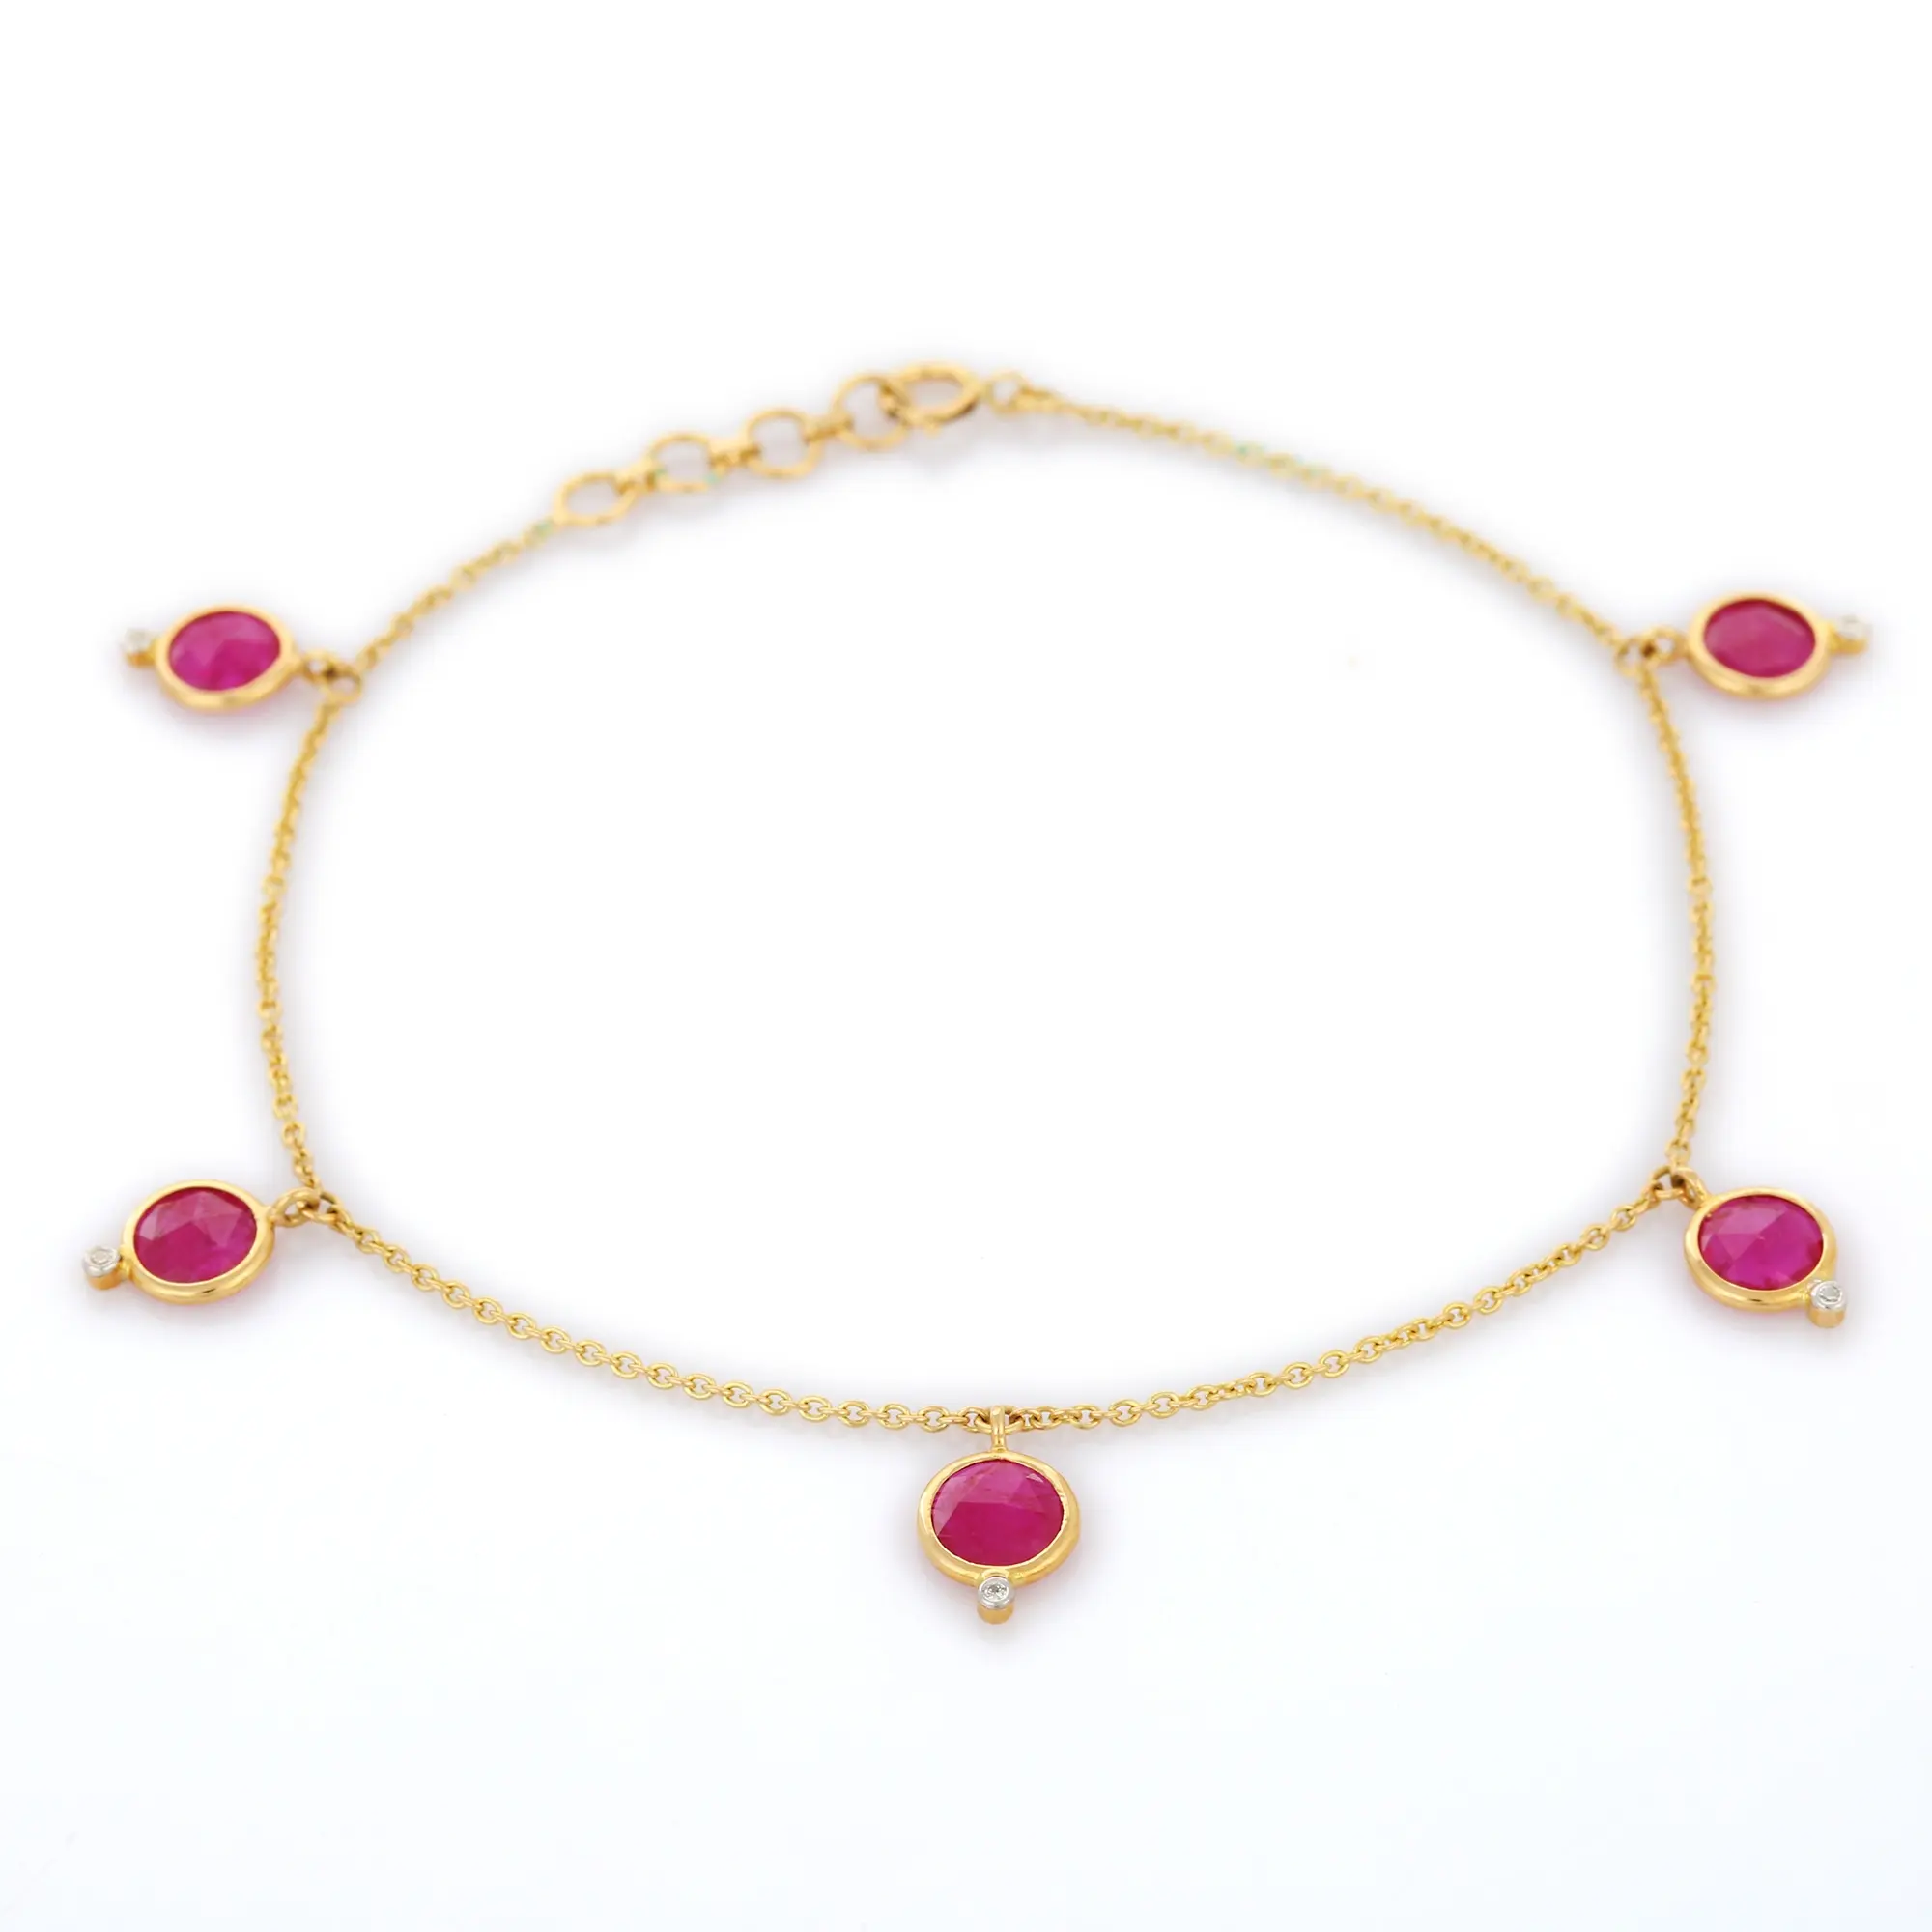 Best Selling Product Natural Round Ruby And Diamond Minimal Bracelet 18K Solid Yellow Gold Gemstone Pendant Gor Women Girls